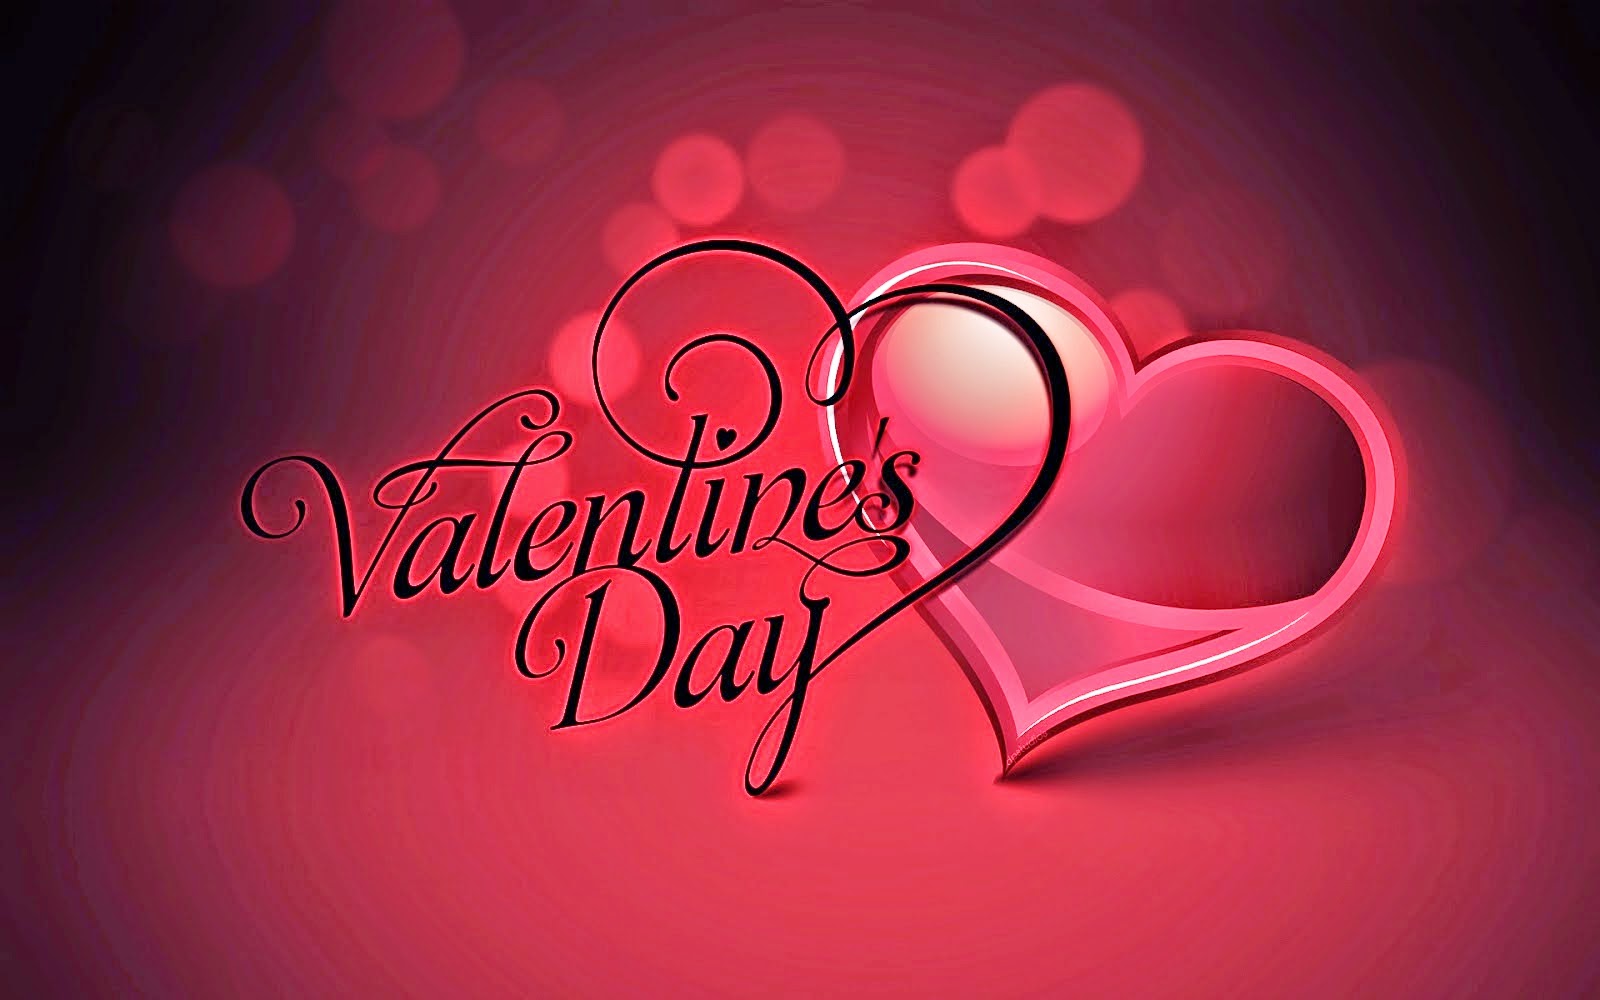 Valentine’s Day: Roots & Islamic View